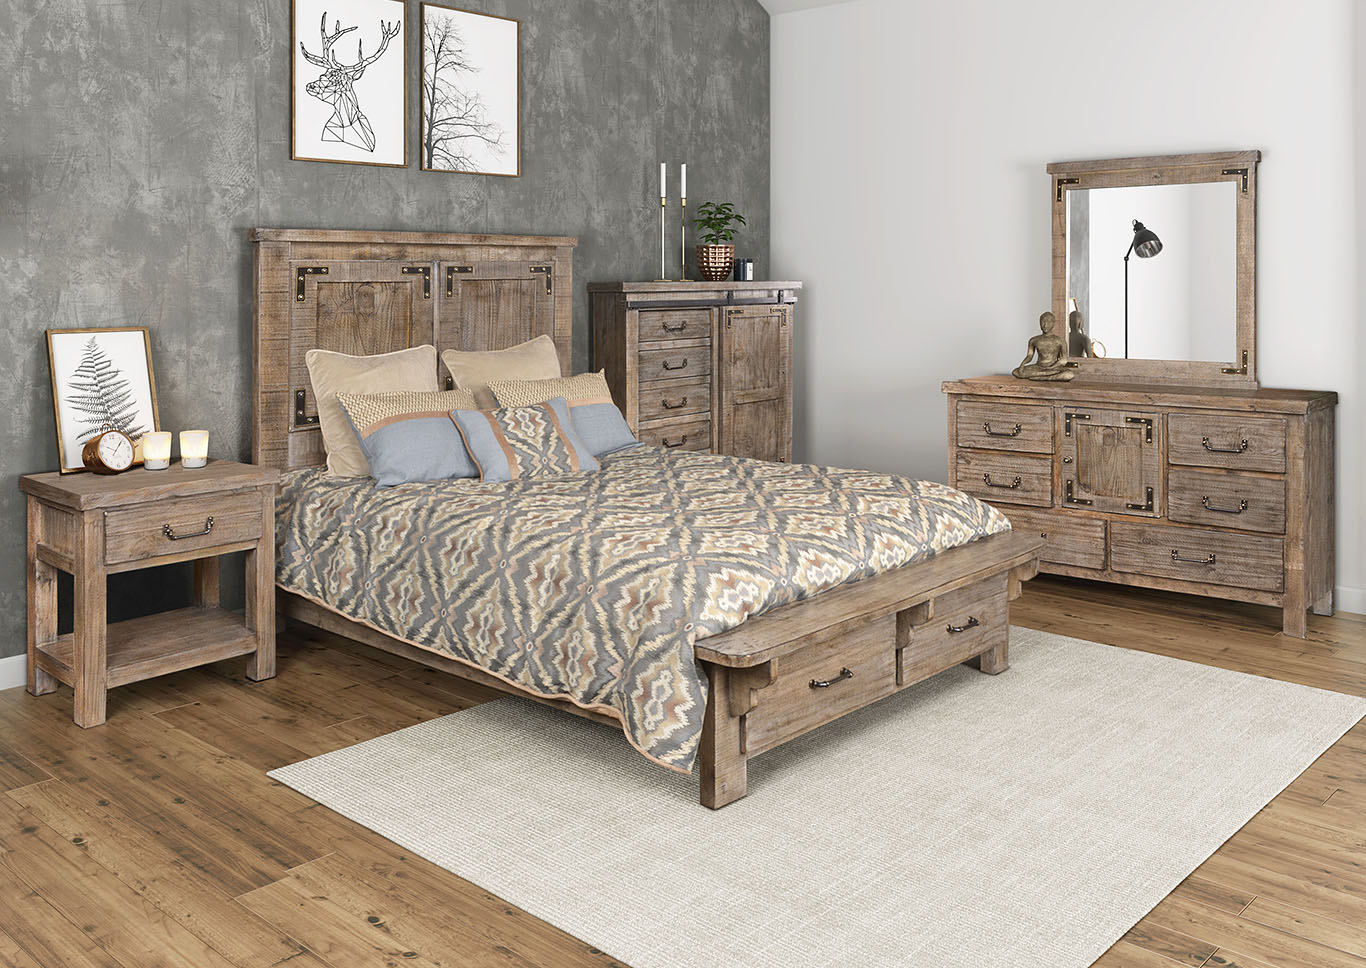 Foundry Eastern King Bed,Horizon Home